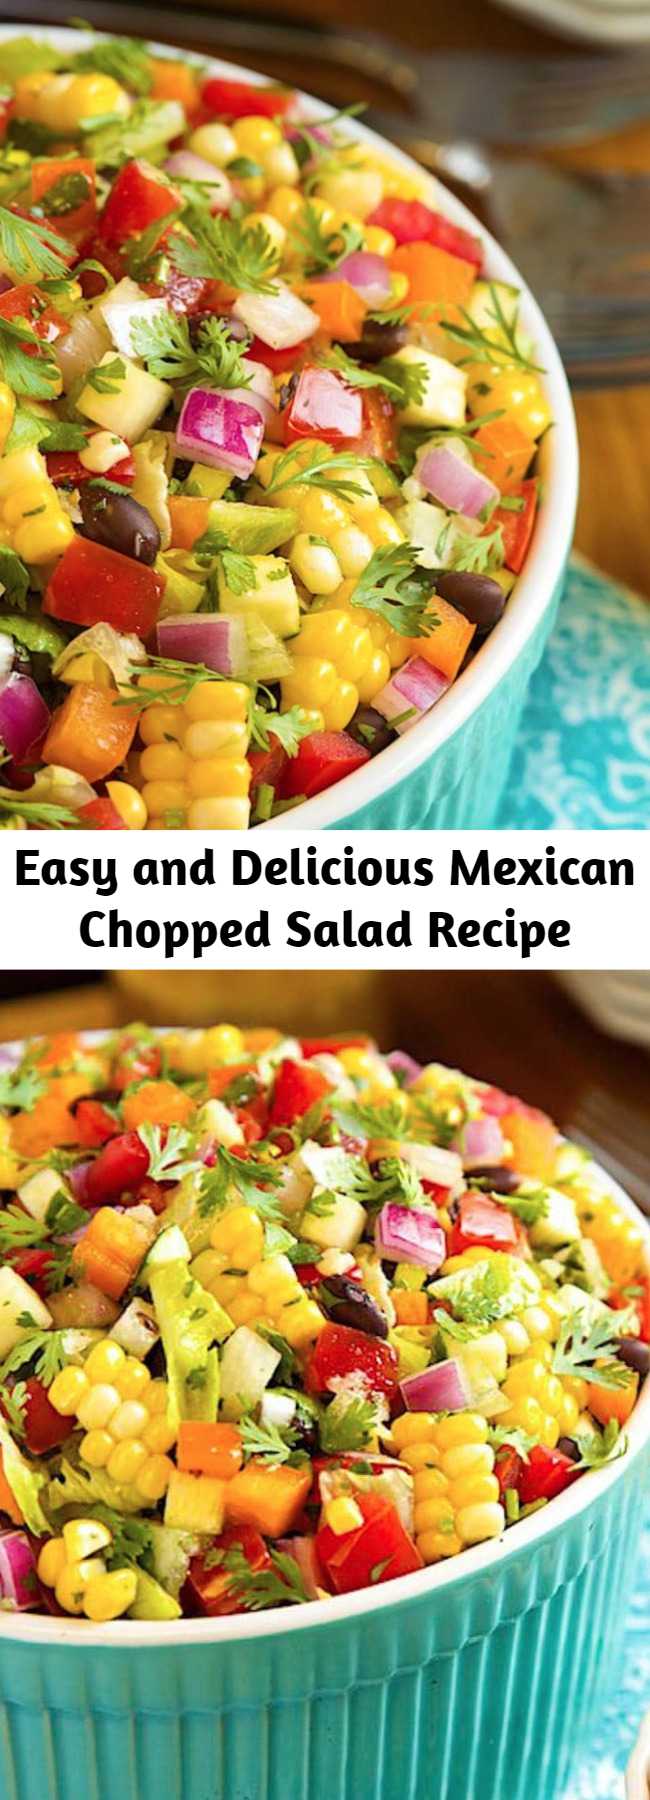 Easy and Delicious Mexican Chopped Salad Recipe - This Mexican Chopped Salad might just be the freshest, healthiest, most delicious salad you’ve ever had the pleasure of meeting. And it’s loaded with fabulous Southwestern flavor! This Mexican Chopped Salad is perfect with any Mexican meal and always gets rave reviews! It’s also delicious spooned over chicken, shrimp or pork or beef!